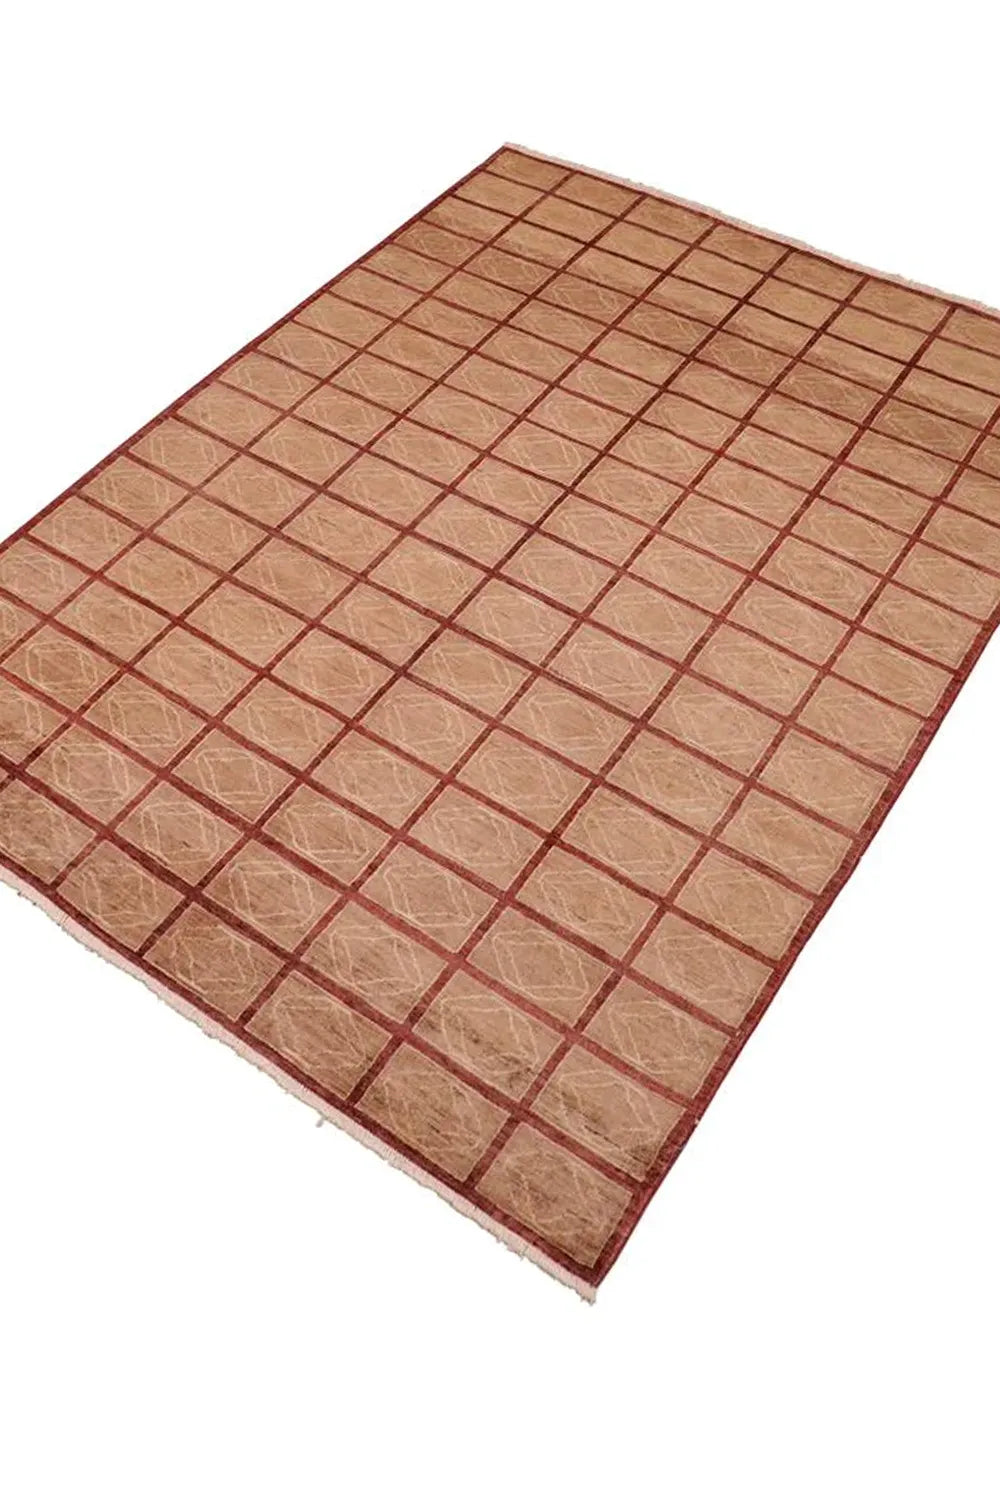 Artisan Red and Brown Patterned Rug, perfect for a sophisticated interior.